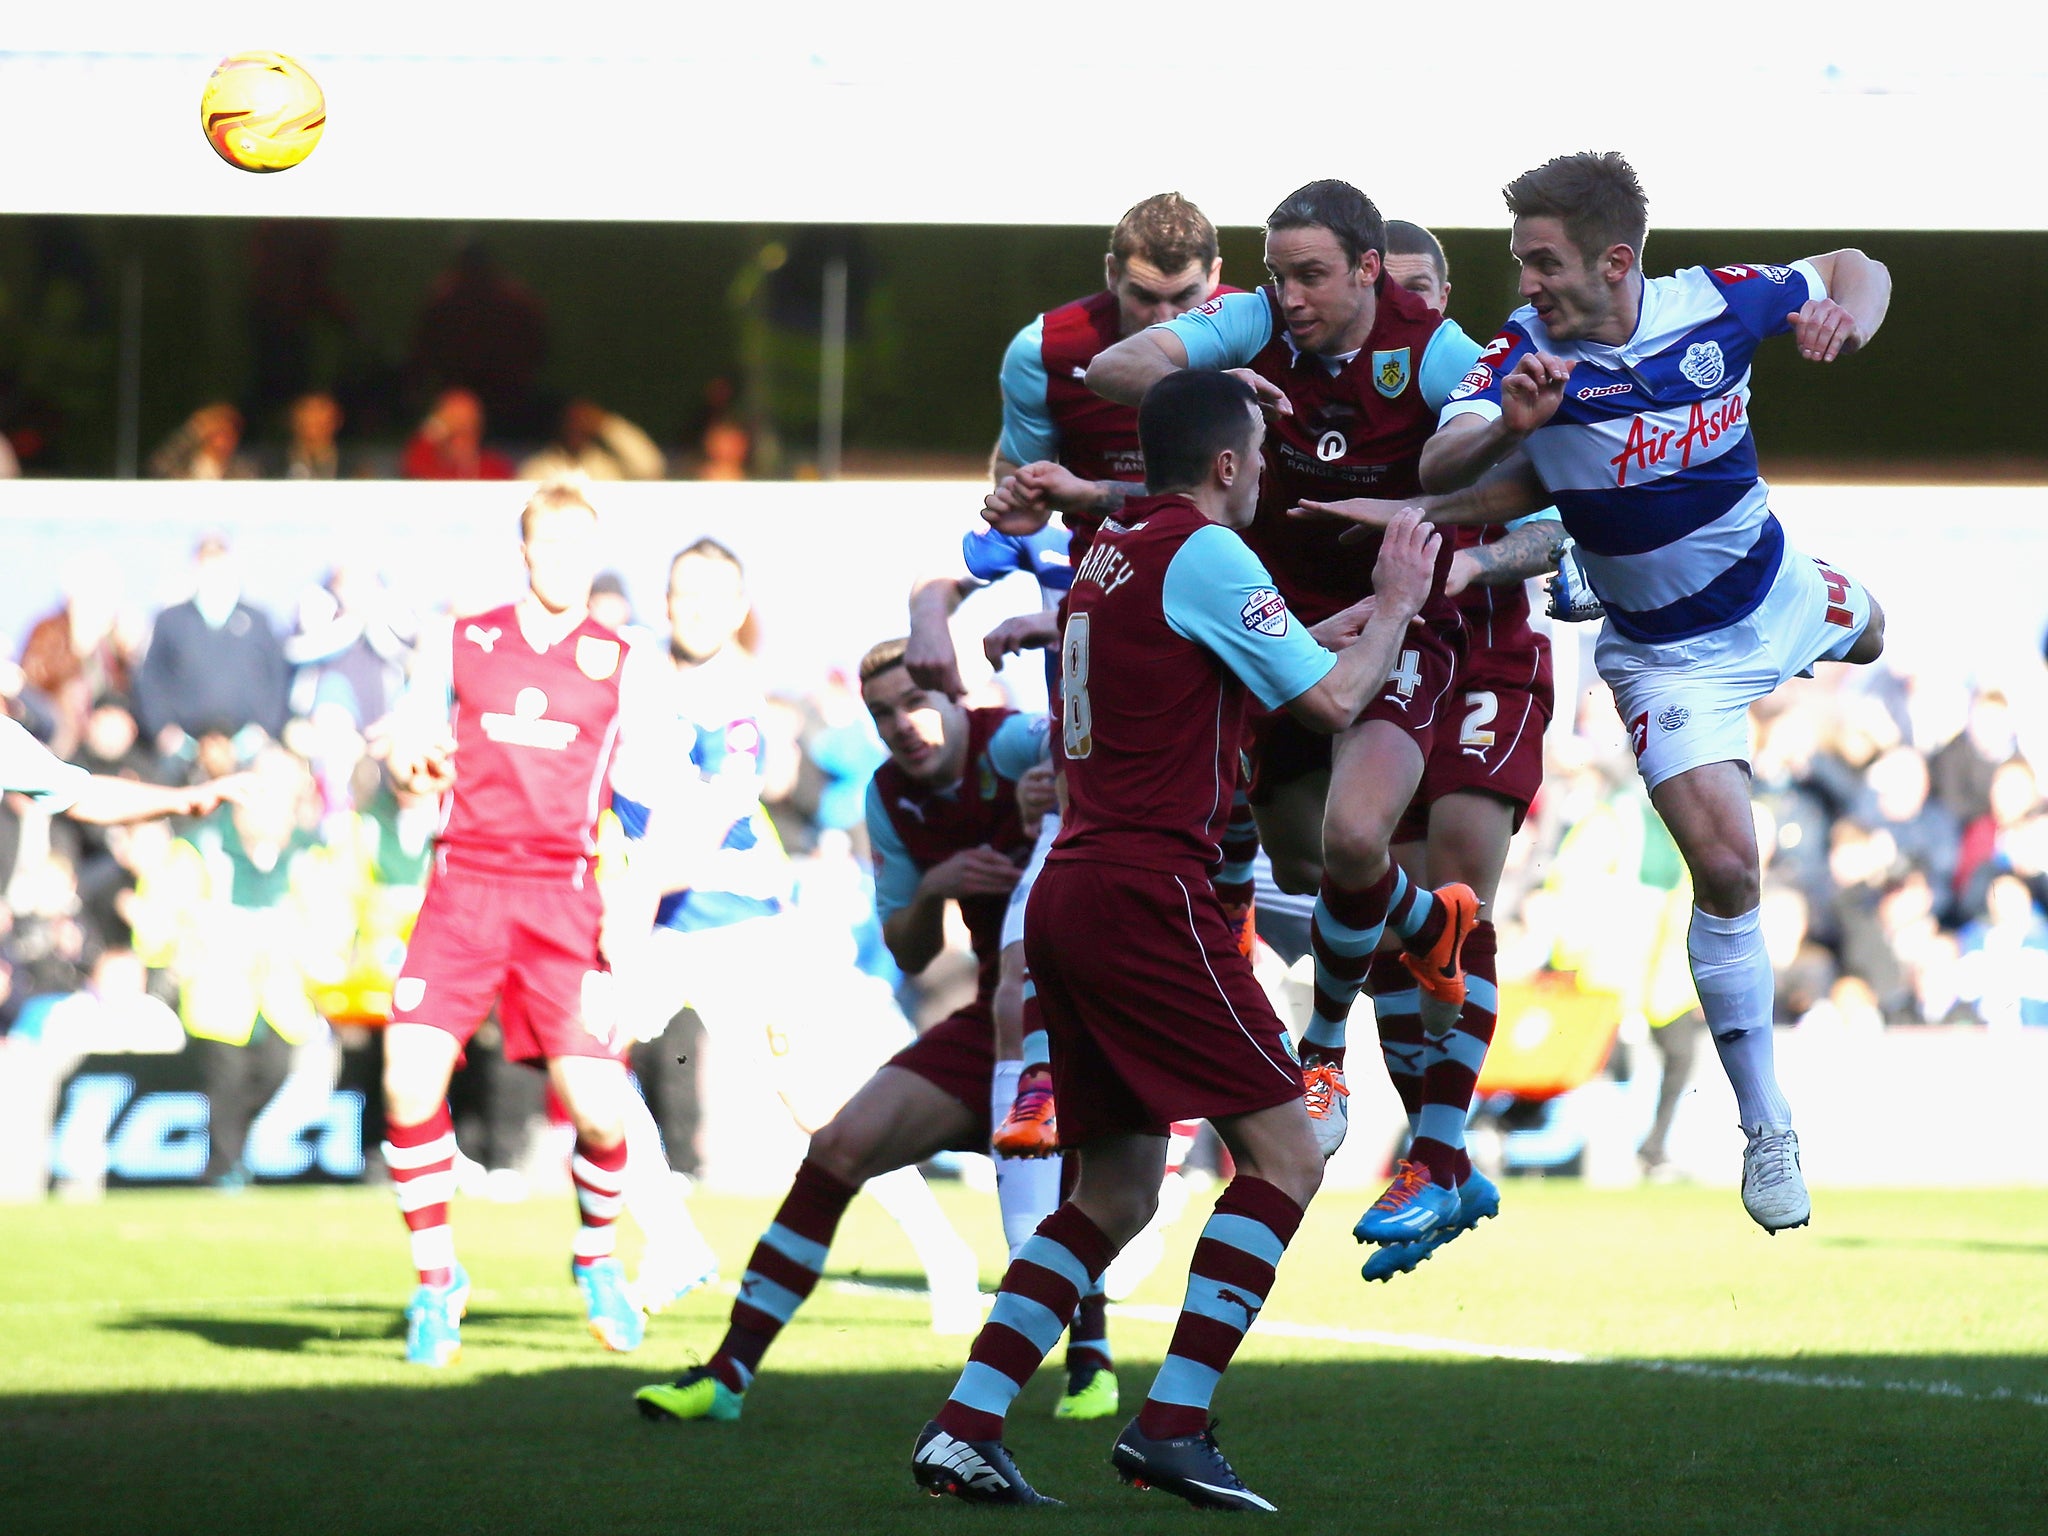 Queens Park Rangers and Burnley players compete for the ball during their Championship clash at Loftus Road